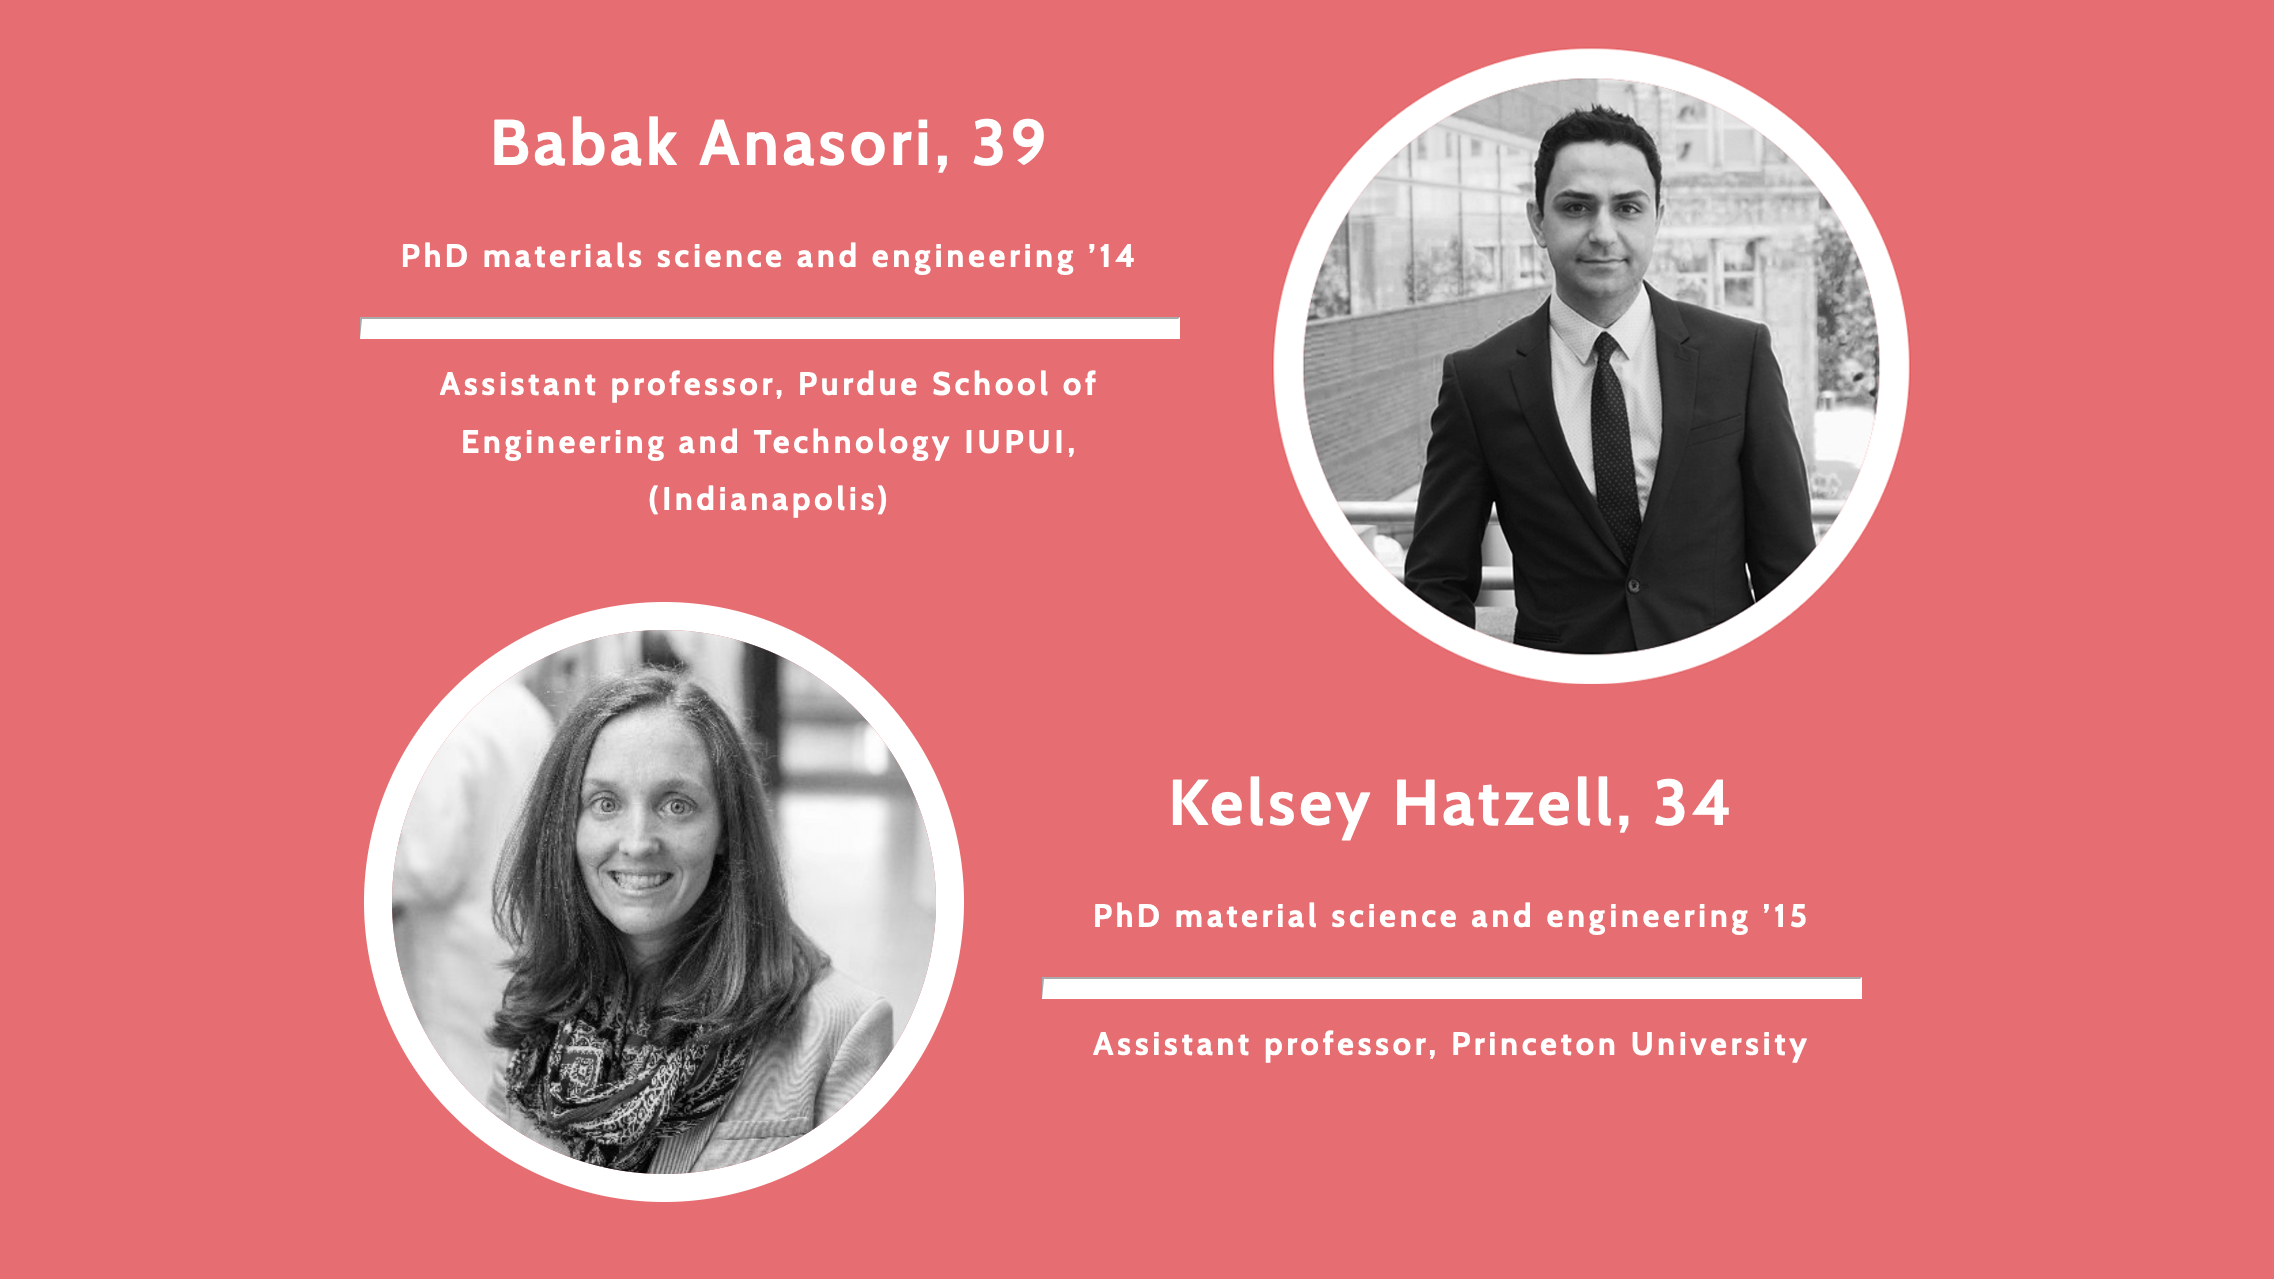 Our Alumni, Kelsey Hatzell and Babak Anasori, Were Recognized Among the Drexel 40 Under 40 Program This Year